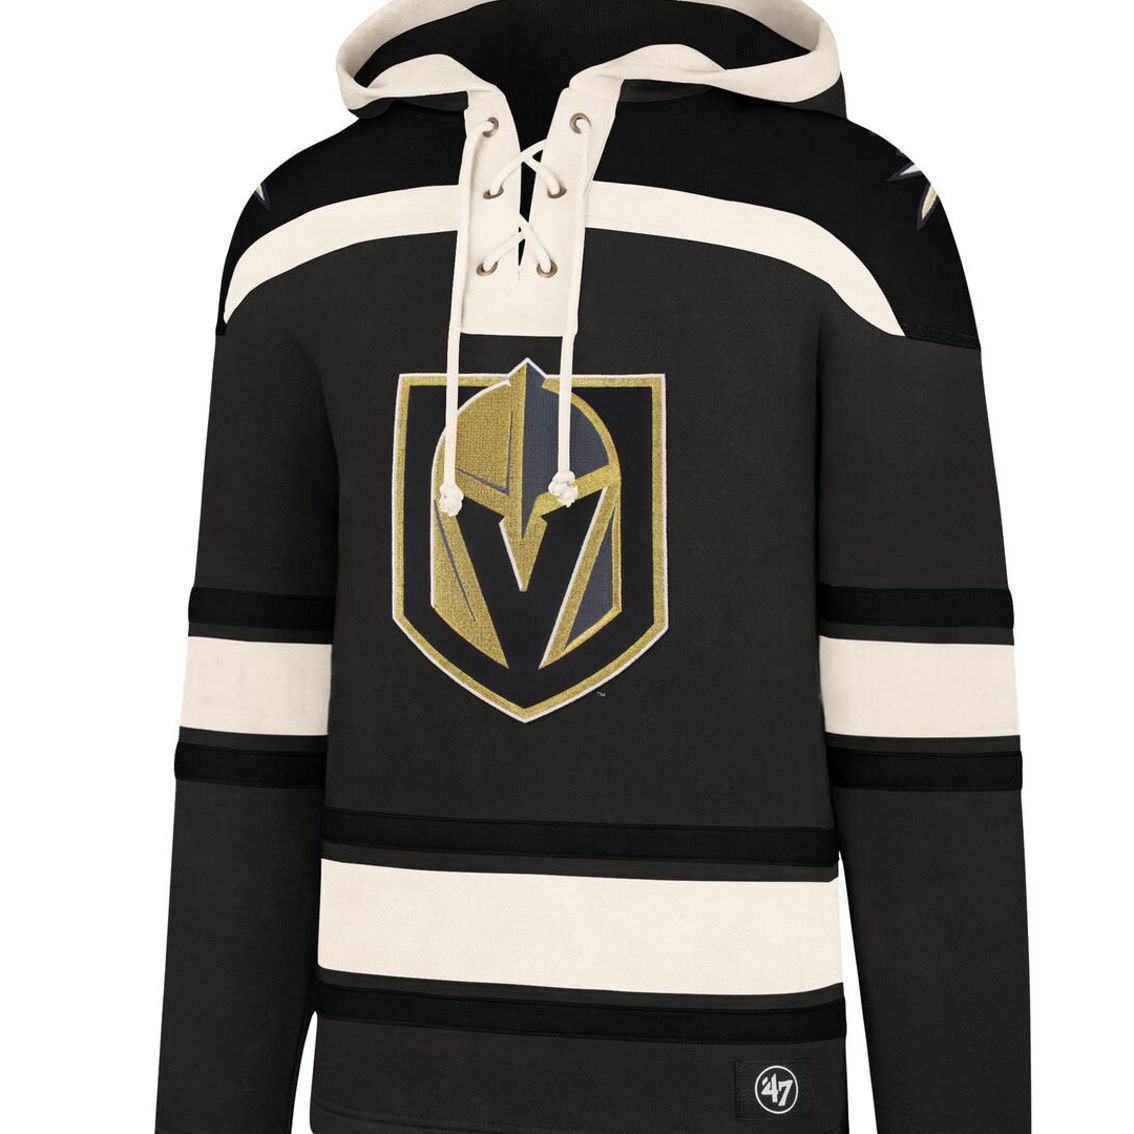 '47 Men's Charcoal Vegas Golden Knights Superior Lacer Pullover Hoodie - Image 3 of 4